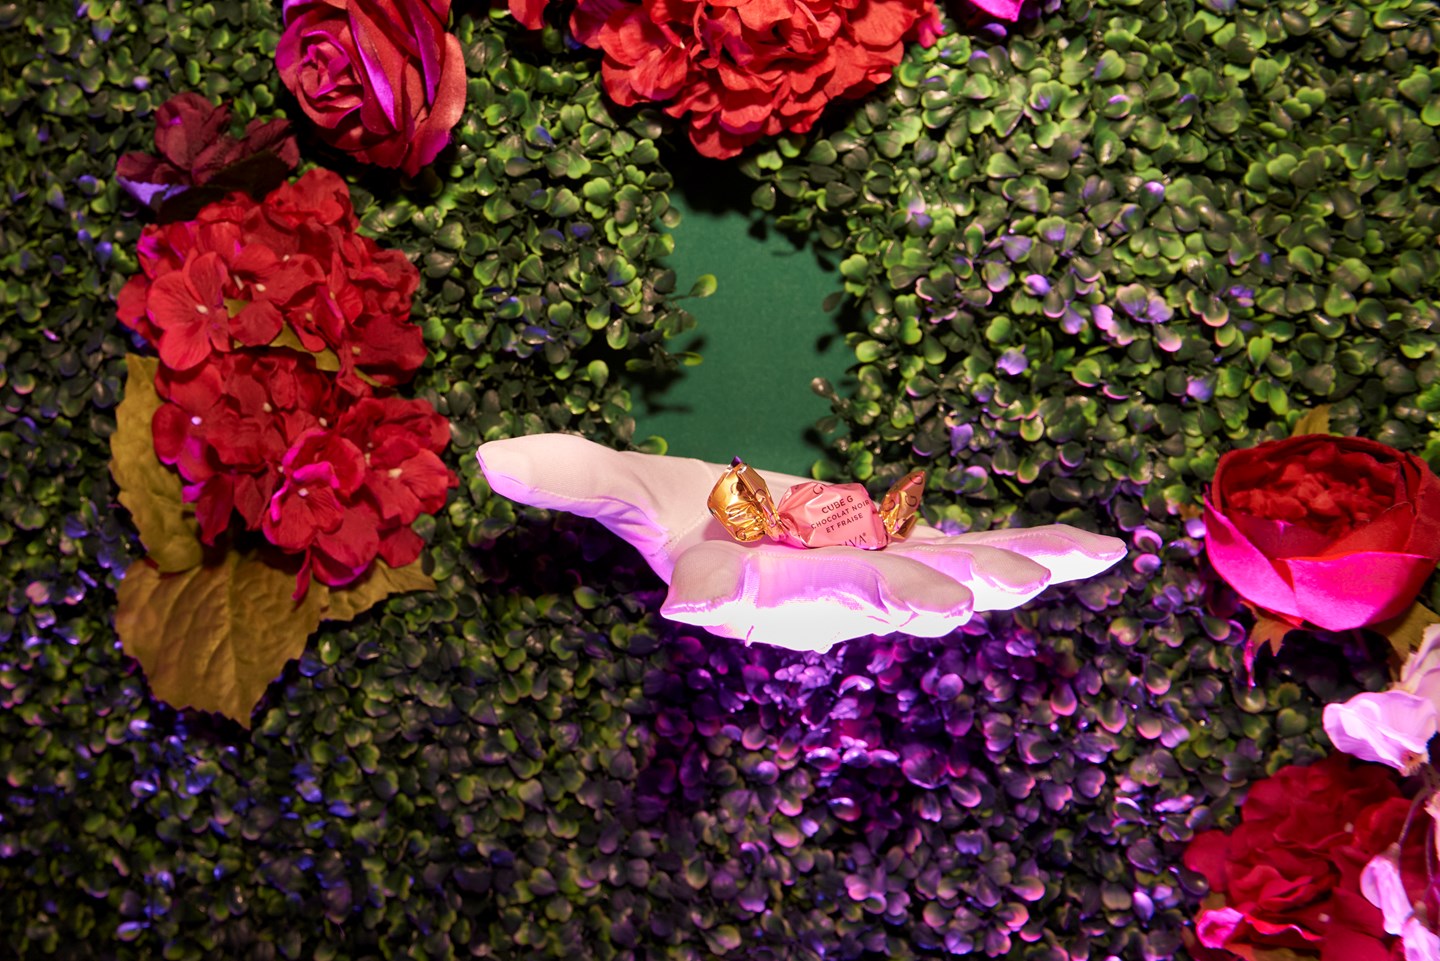 A wall of flowers with a hand coming out with a piece of candy